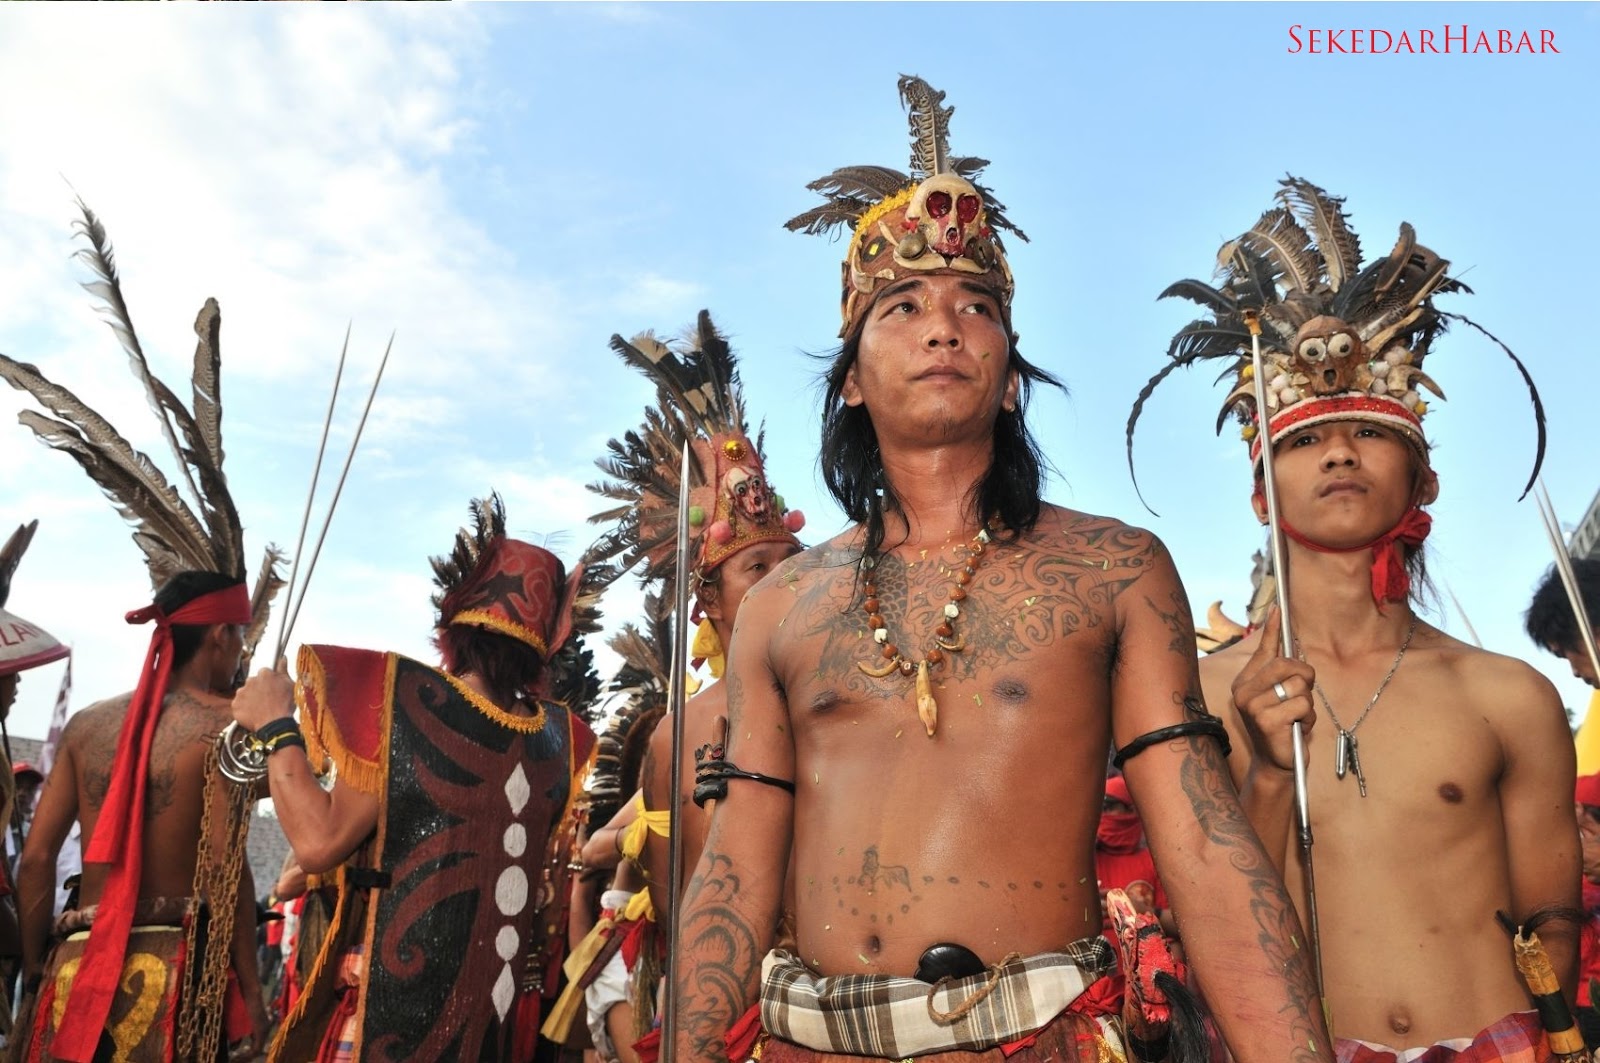 Dayak Tribe In Kalimantan Indonesia, Do you guys want a holiday here ...